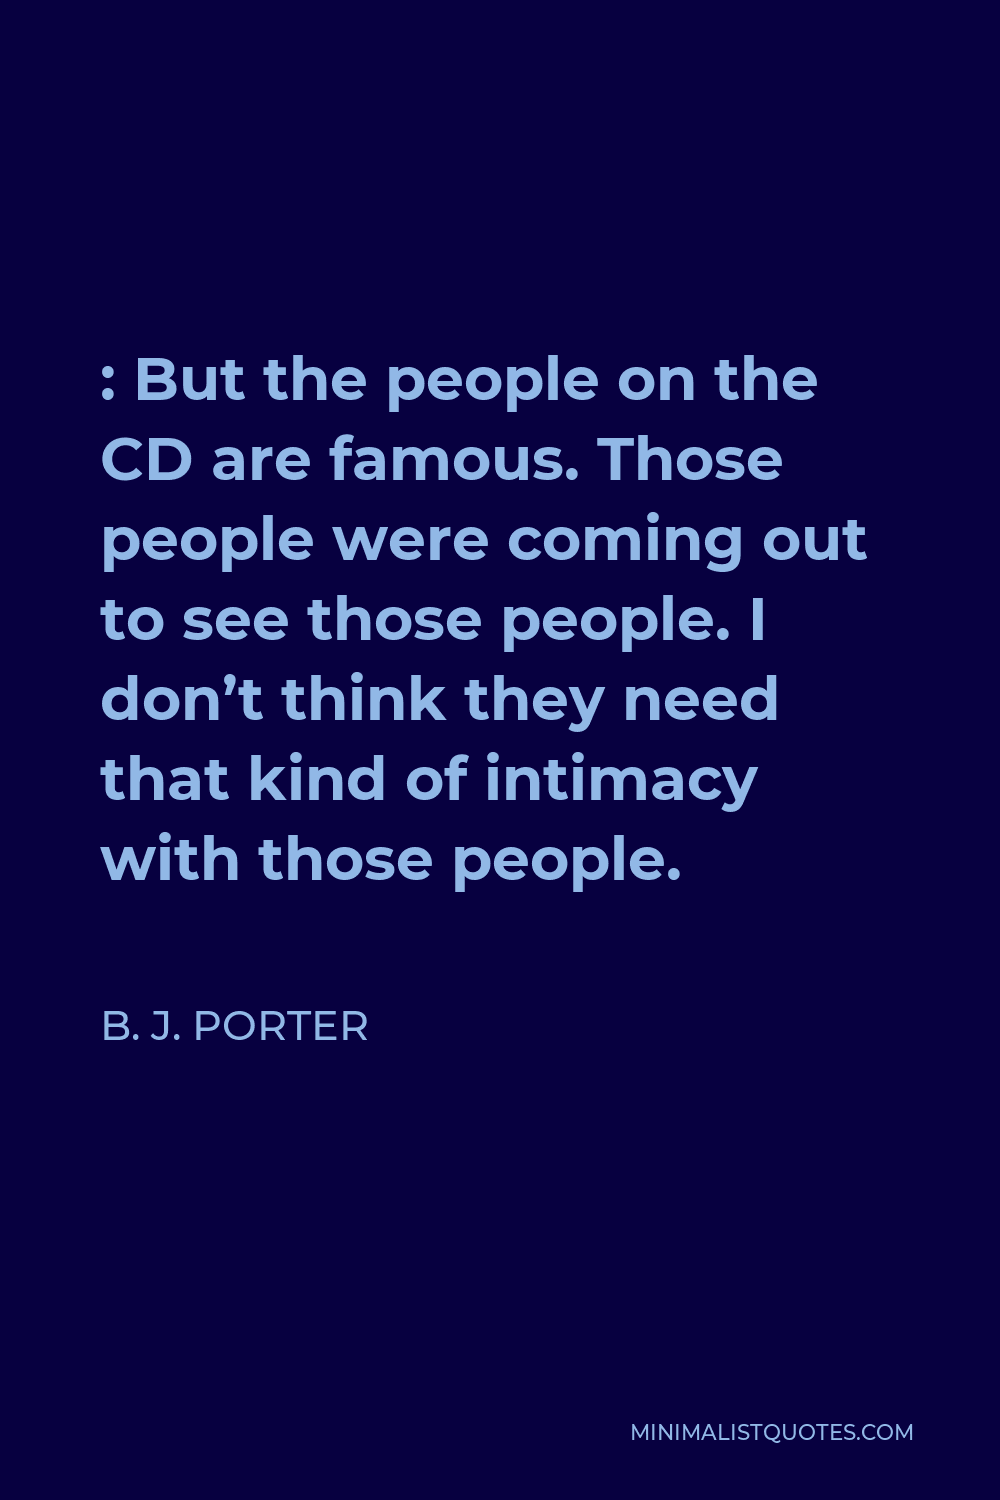 B. J. Porter Quote - : But the people on the CD are famous. Those people were coming out to see those people. I don’t think they need that kind of intimacy with those people.